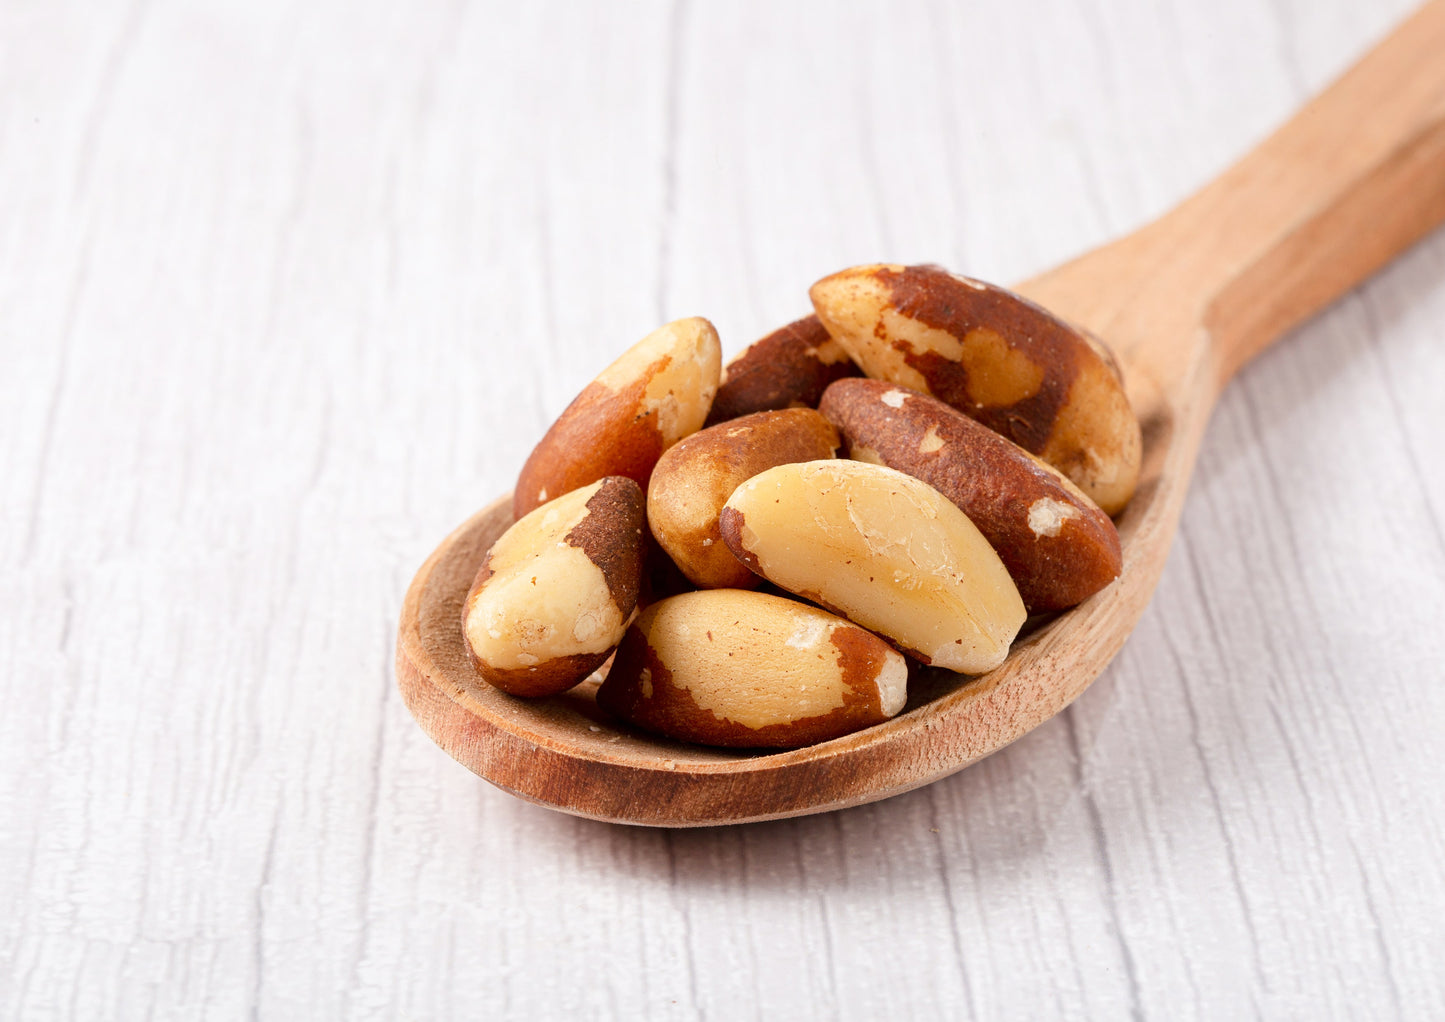 Dry Roasted Brazil Nuts – Unsalted, Whole, Oven Roasted Brazilian Nuts, No Oil Added, Shelled, Vegan, Kosher, Bulk. Good Source of Protein and Essential Fatty Acids. Crunchy Snack